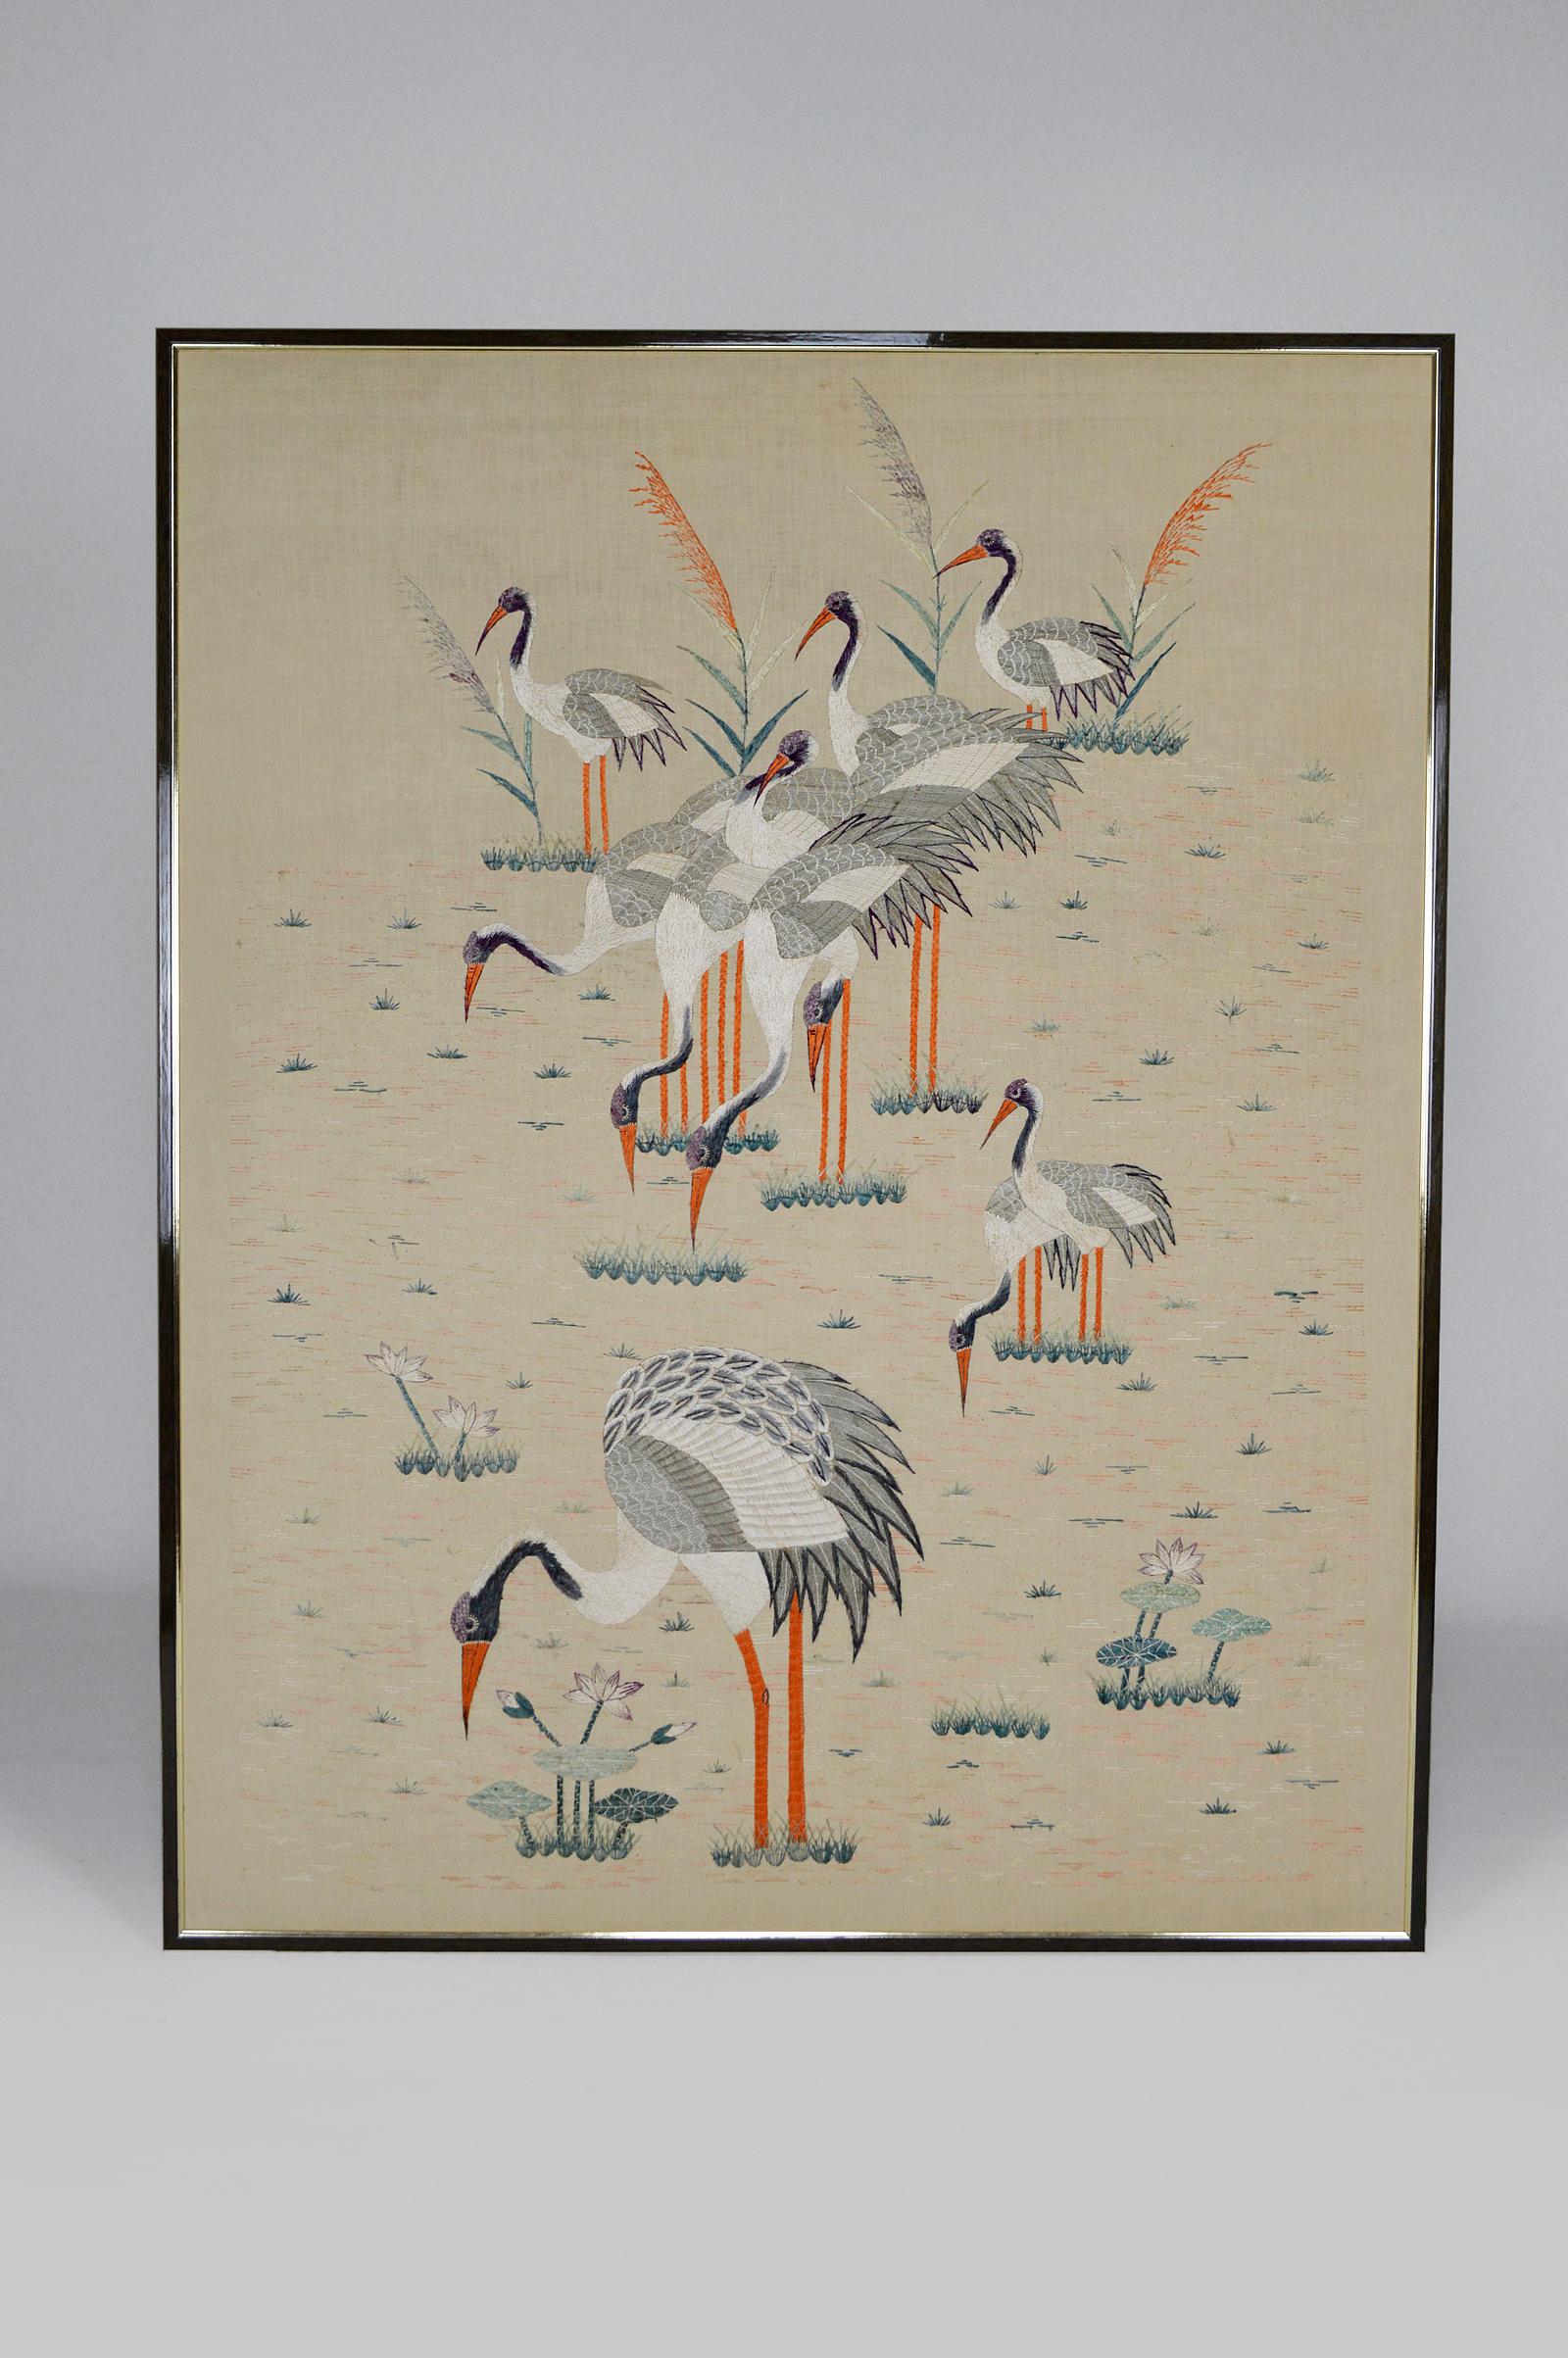 Textile panel / embroidered tapestry.
Superb and rare craft work, handmade, hundreds of hours of work.
The tapestry represents a group of Asian cranes in a swamp / rice field.
Asia, French Indochina (Tonkin), Actual Vietnam.
Art Deco era, circa